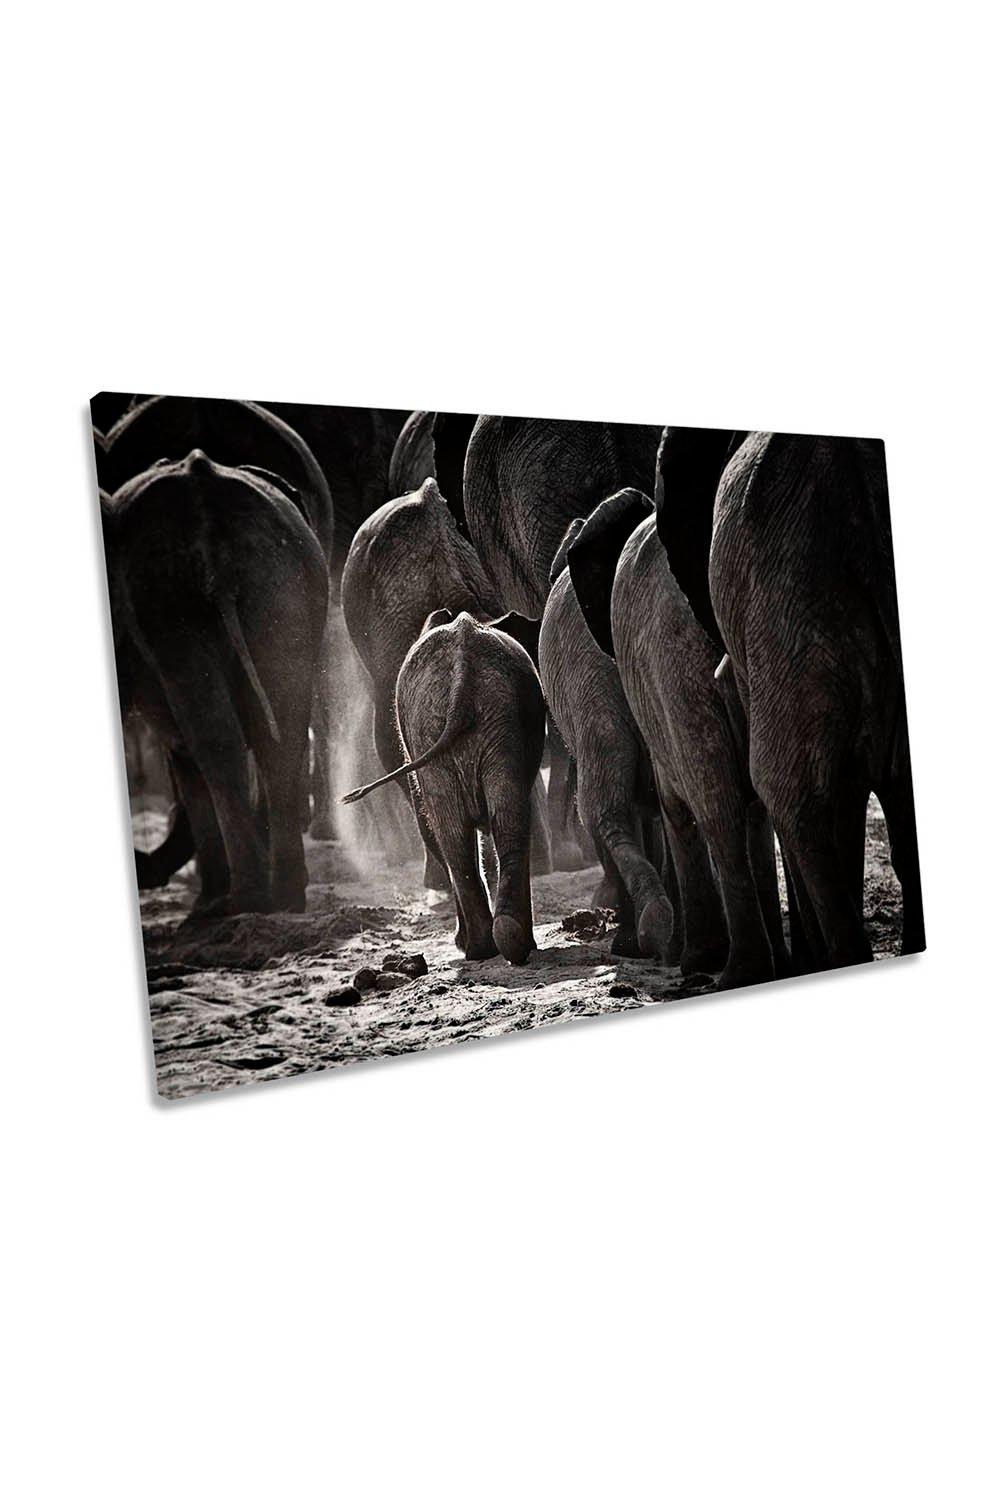 Walking Home Elephant Family Canvas Wall Art Picture Print